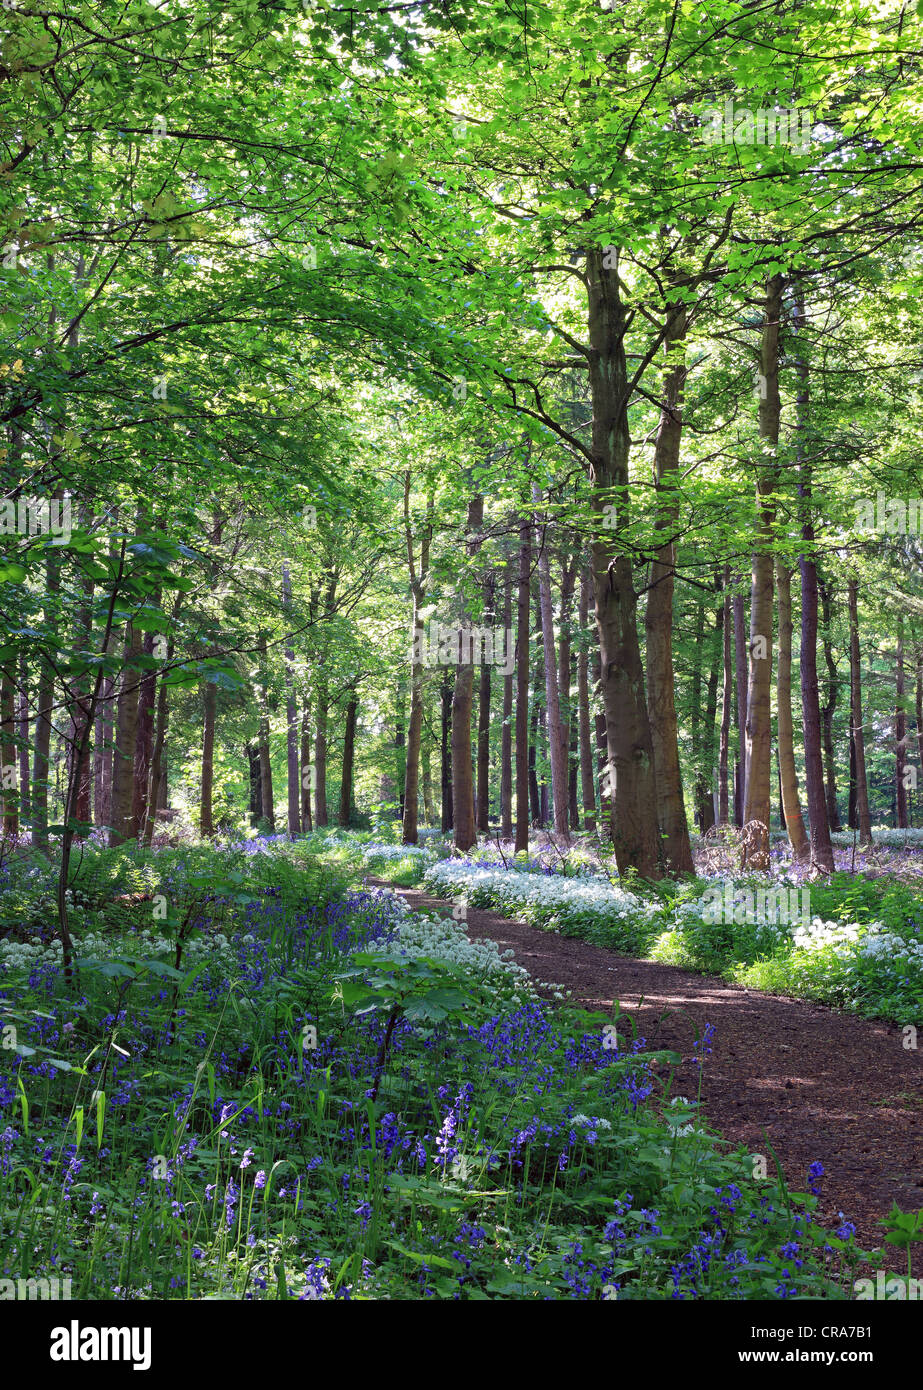 This image of Dalkeith Country Park near Edinburgh, Scotland shows an old woodland with bluebells and wild garlic or Ramsons. Stock Photo